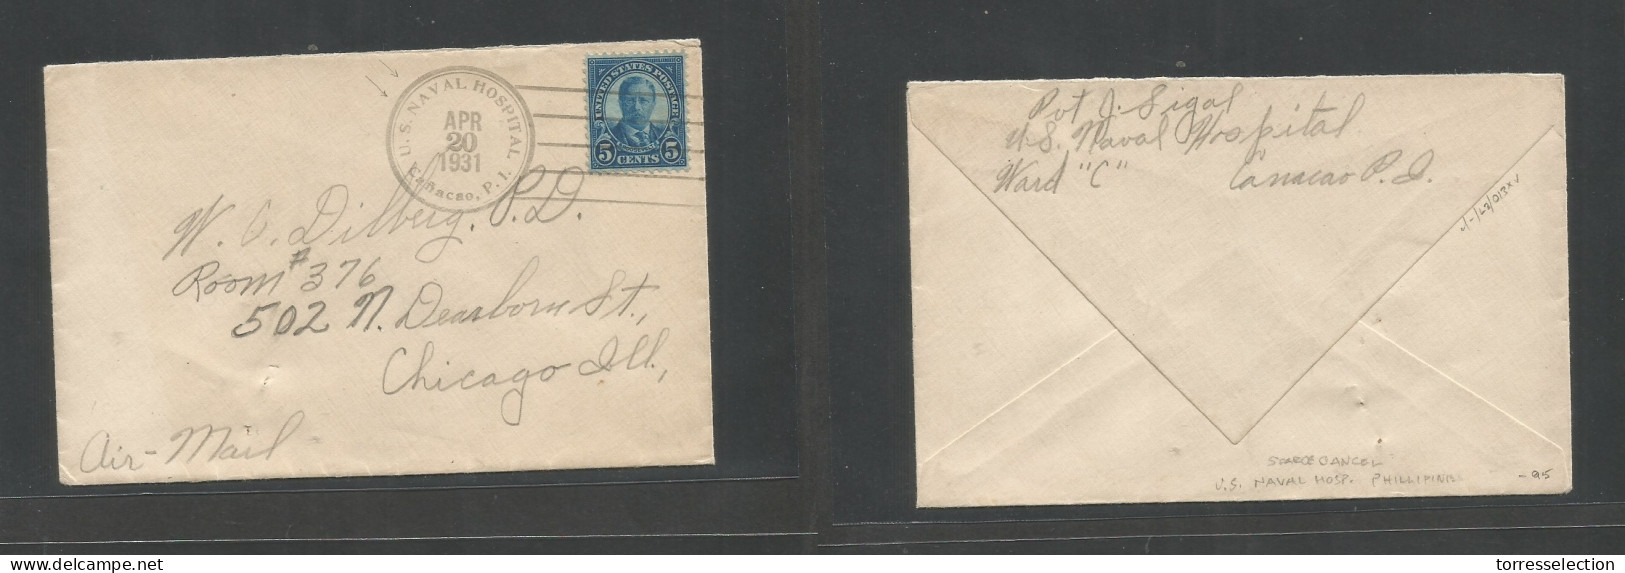 PHILIPPINES. 1931 (20 Apr) US Naval Hospital, Cañacao - USA, Chicago, Ill. Fkd Env 5c Blue, Tied Cds Grill. Airmail Endo - Philippinen